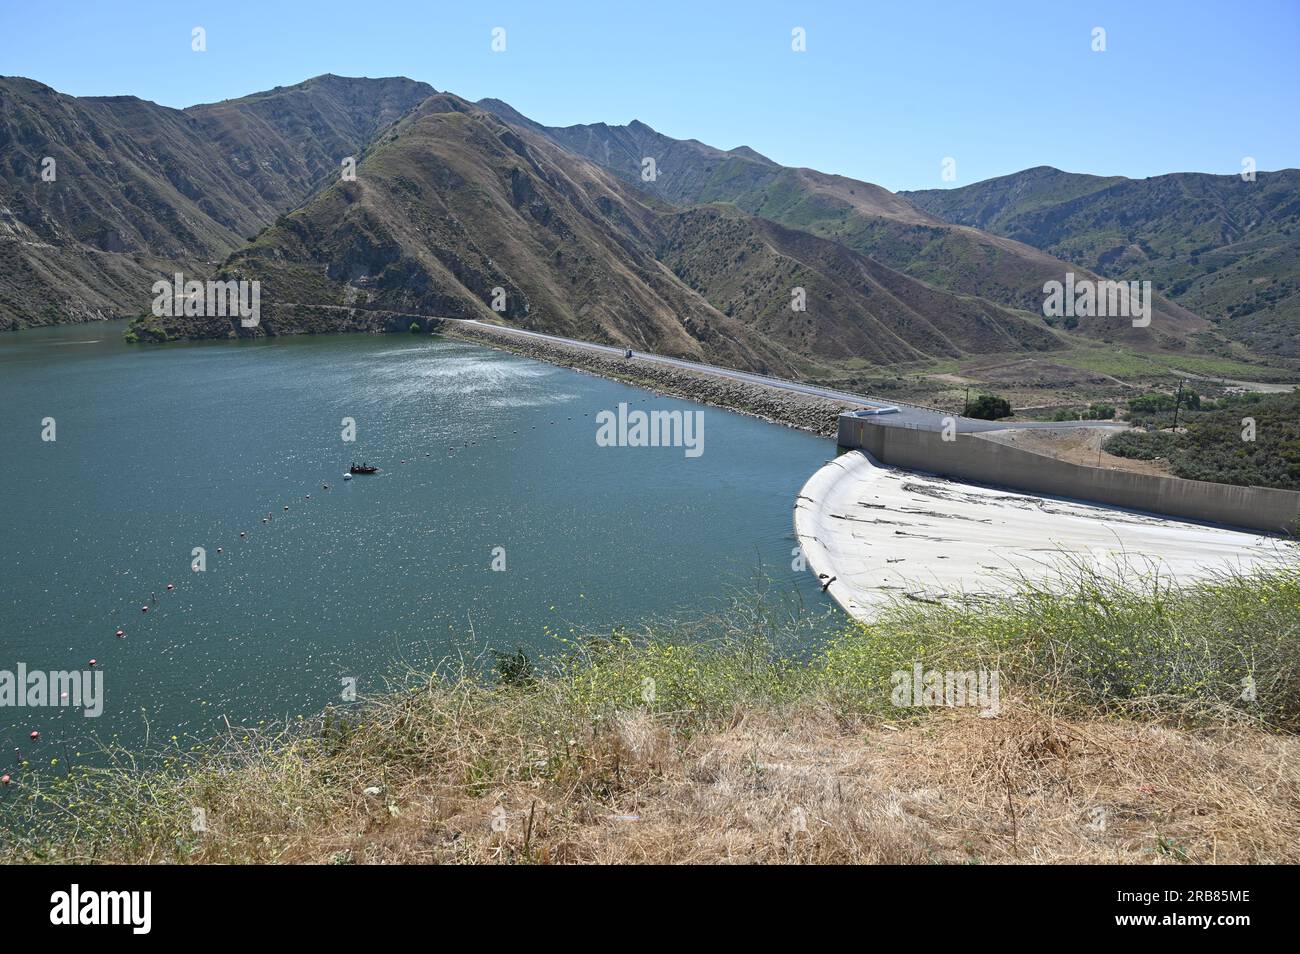 The Santa Felicia Dam at Lake Piru reservoir located in Los Padres National Forest and Topatopa Mountains of Ventura County, California. Stock Photo